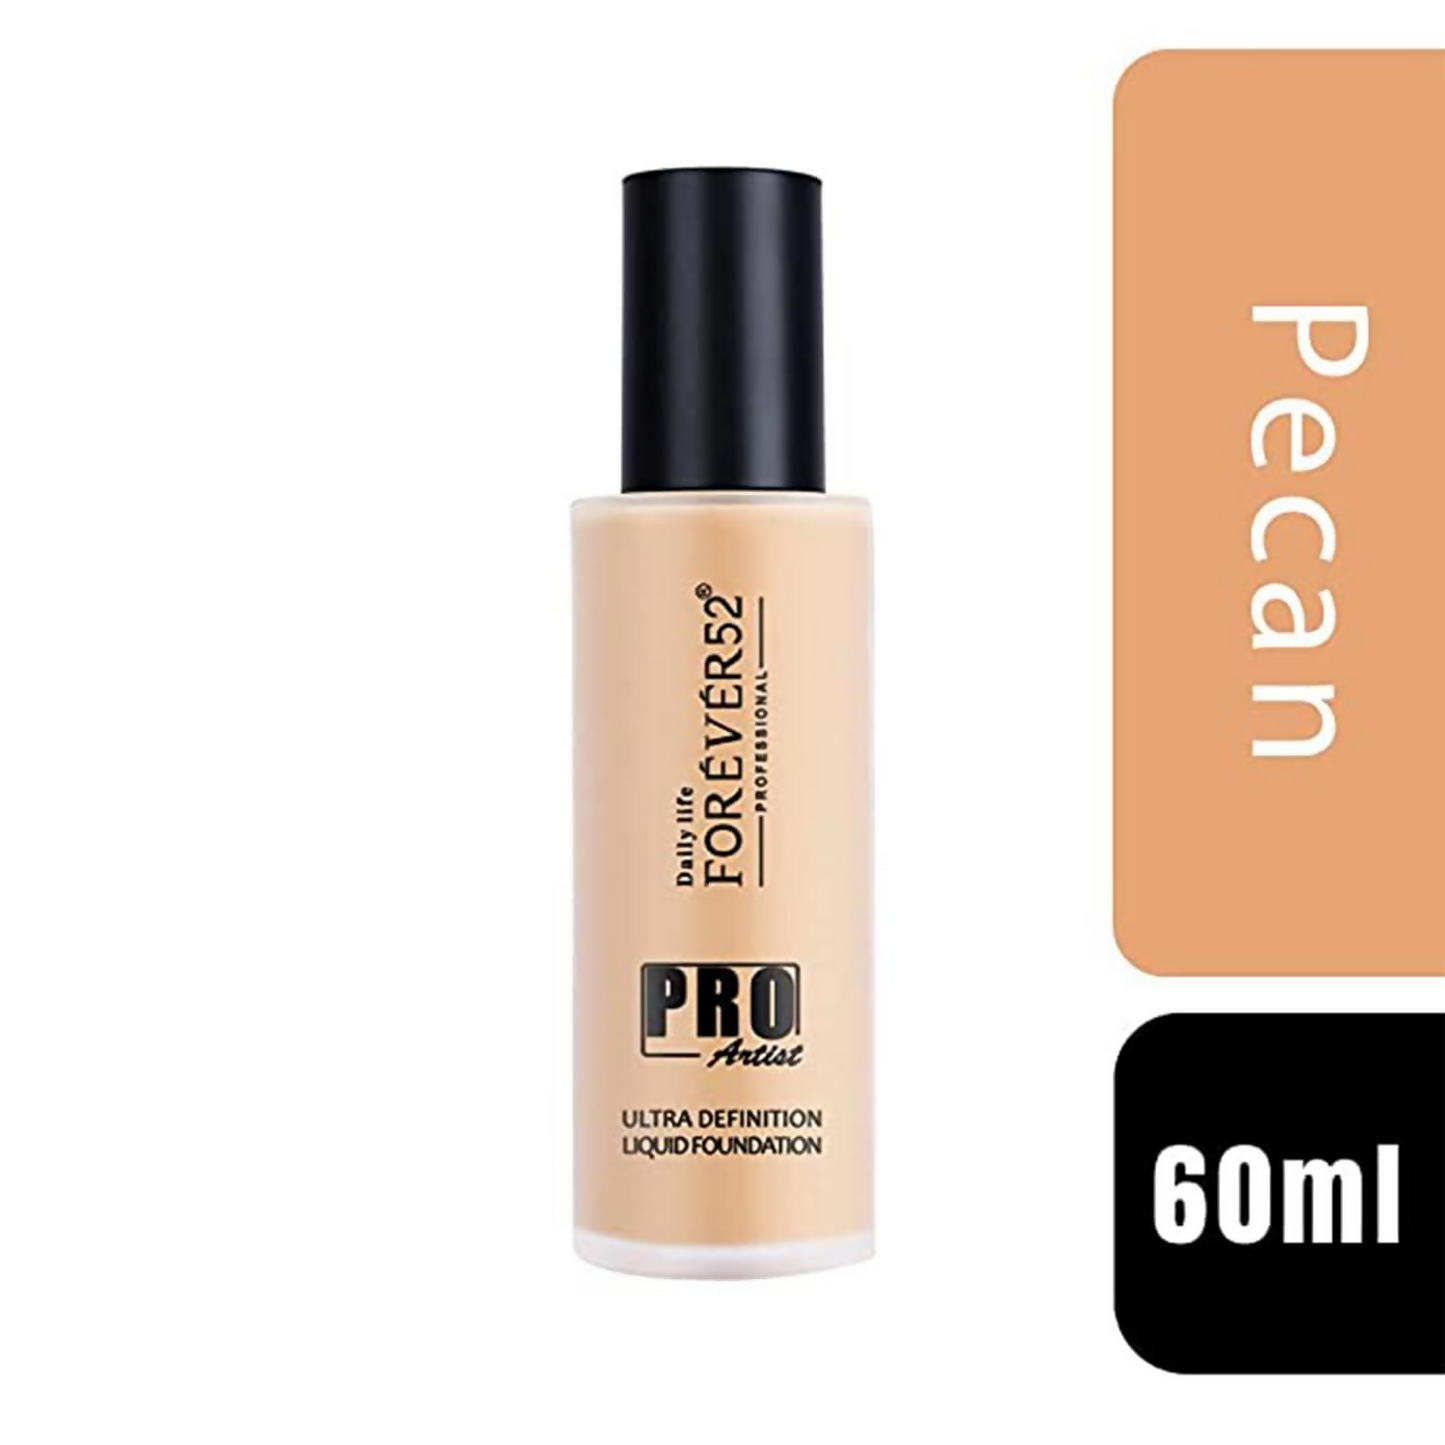 Daily Life Forever52 Pro Artist Ultra Definition Liquid Foundation - Pecan